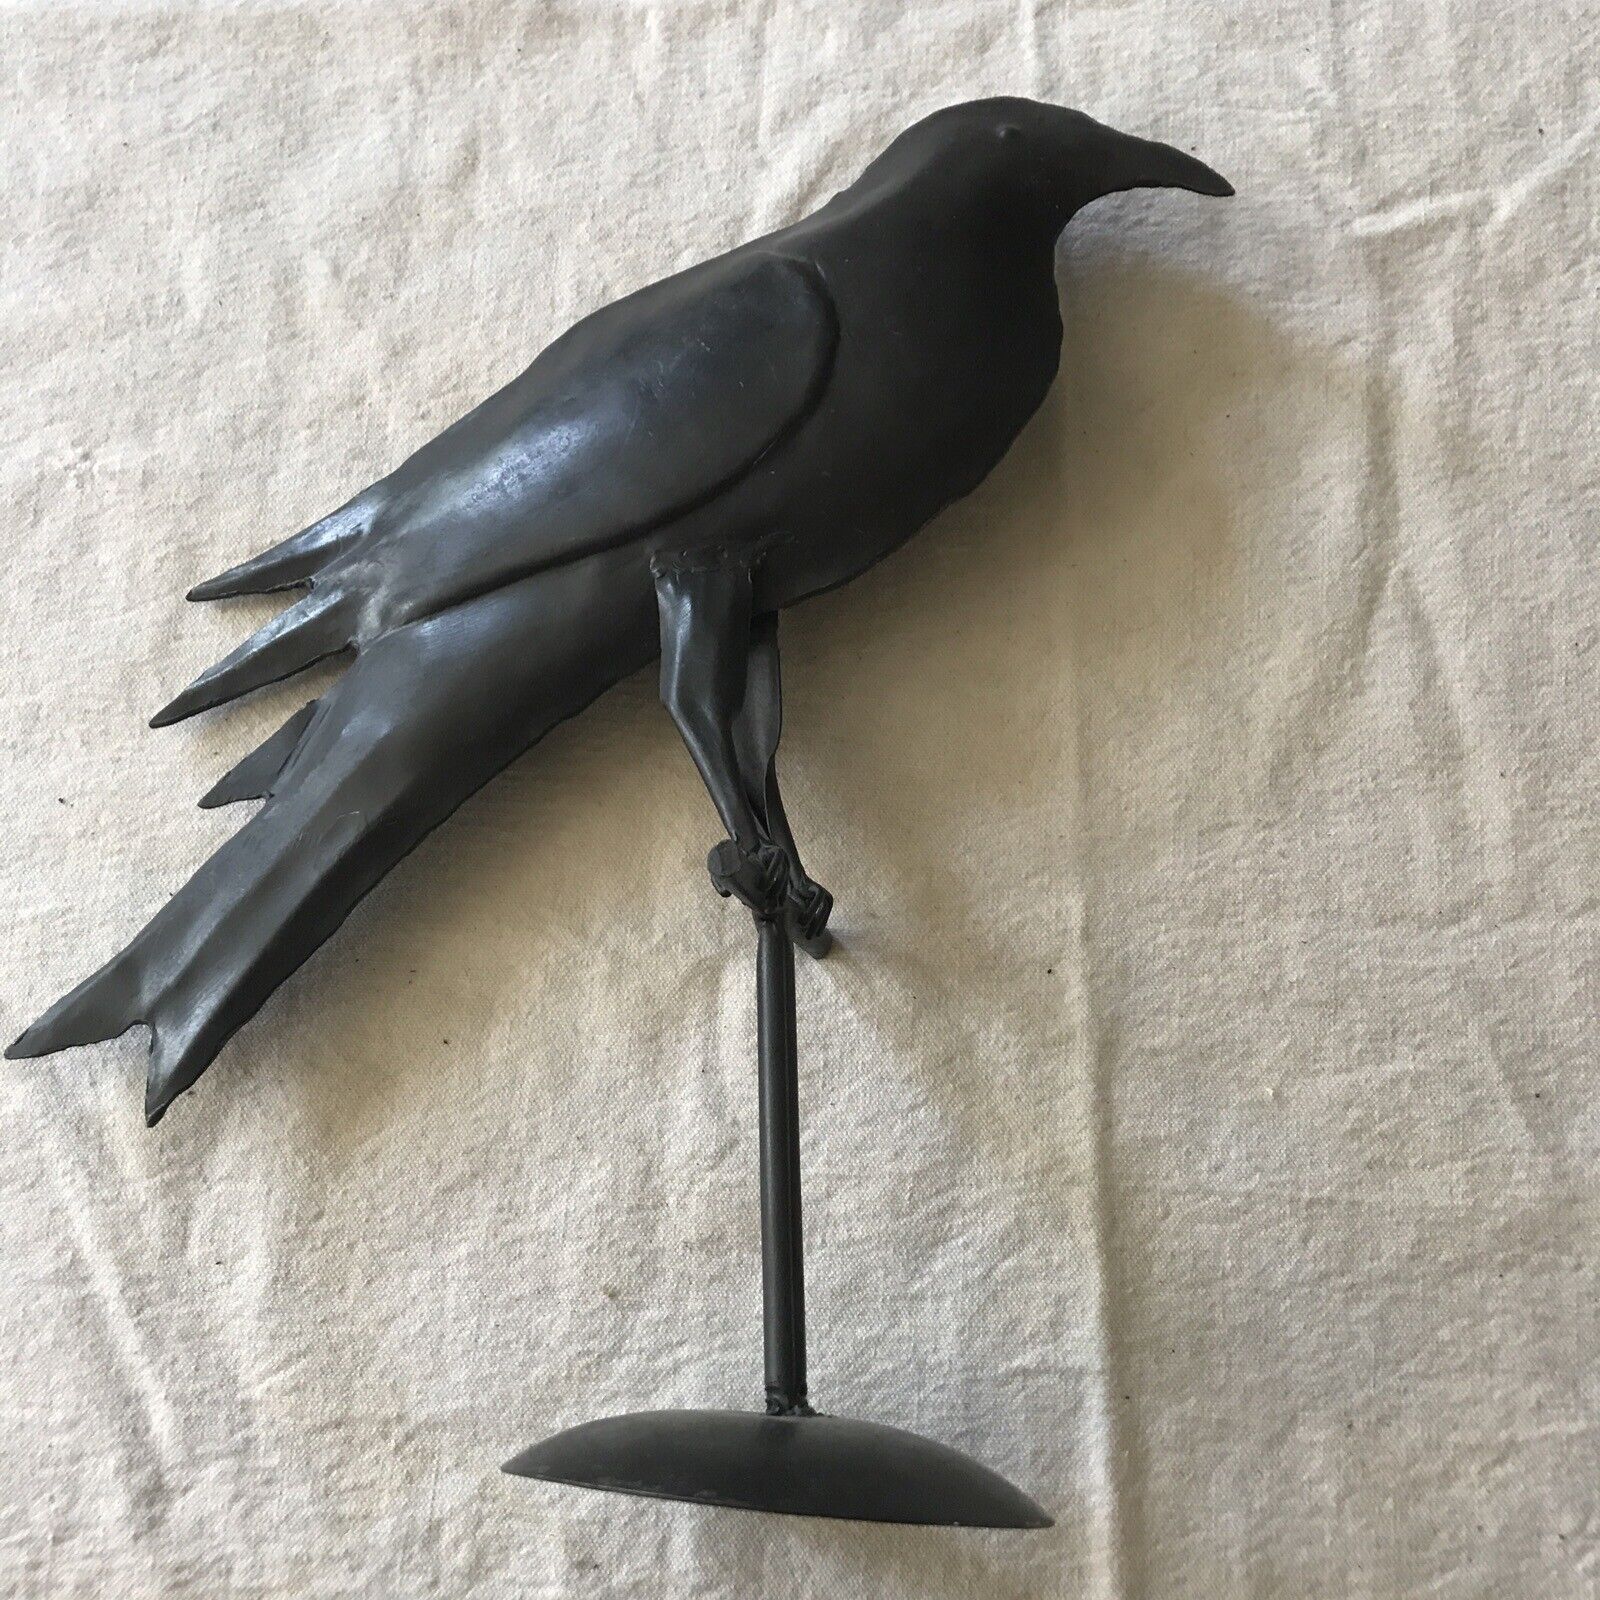 VINTAGE STANDING METAL RAVEN/CROW FIGURINE W Stand- 13” LONG - PRIMITIVE COUNTRY